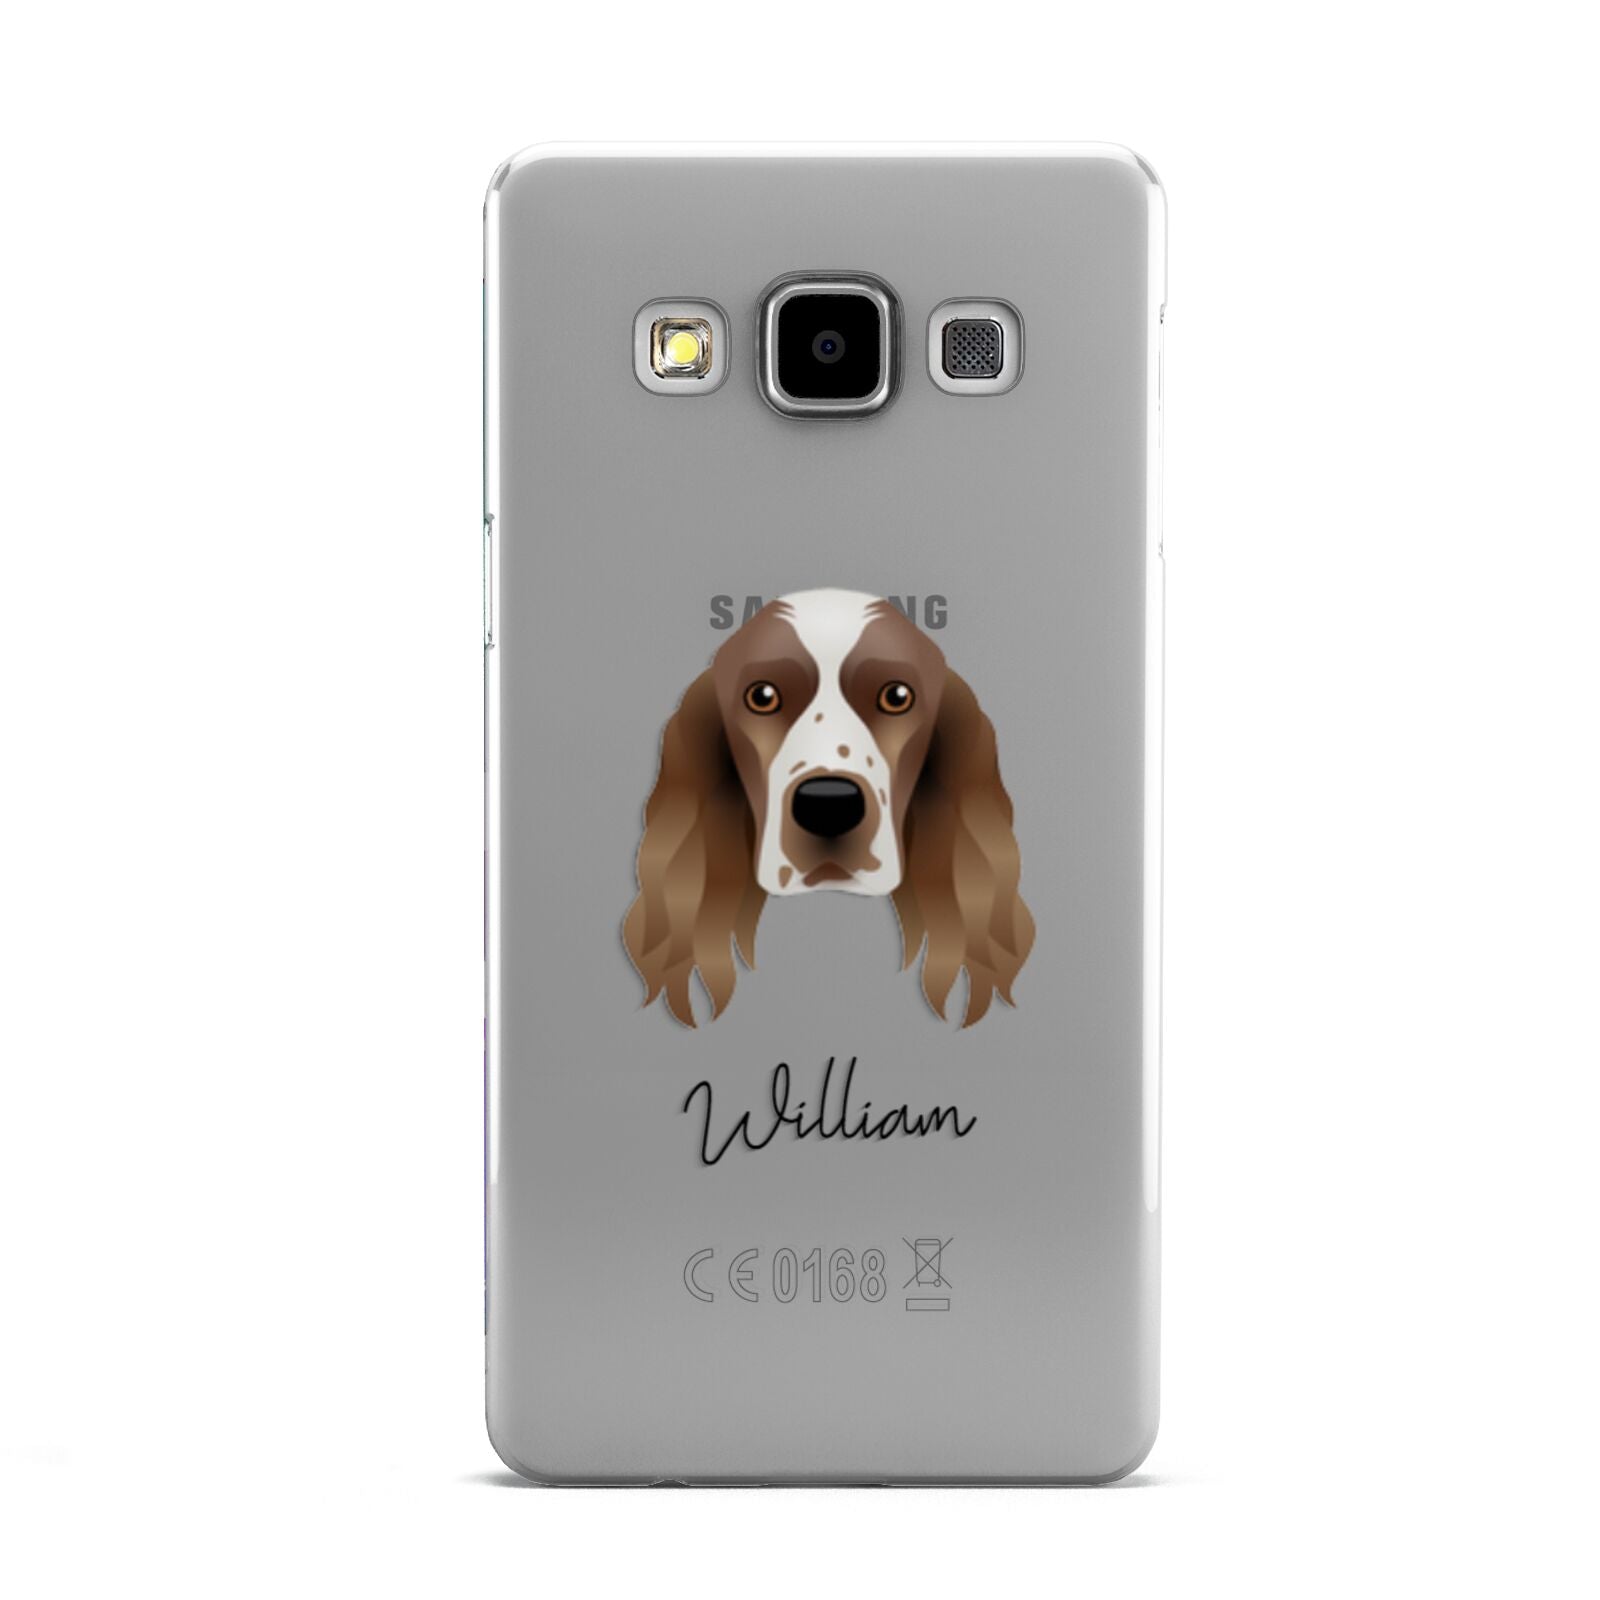 Welsh Springer Spaniel Personalised Samsung Galaxy A5 Case